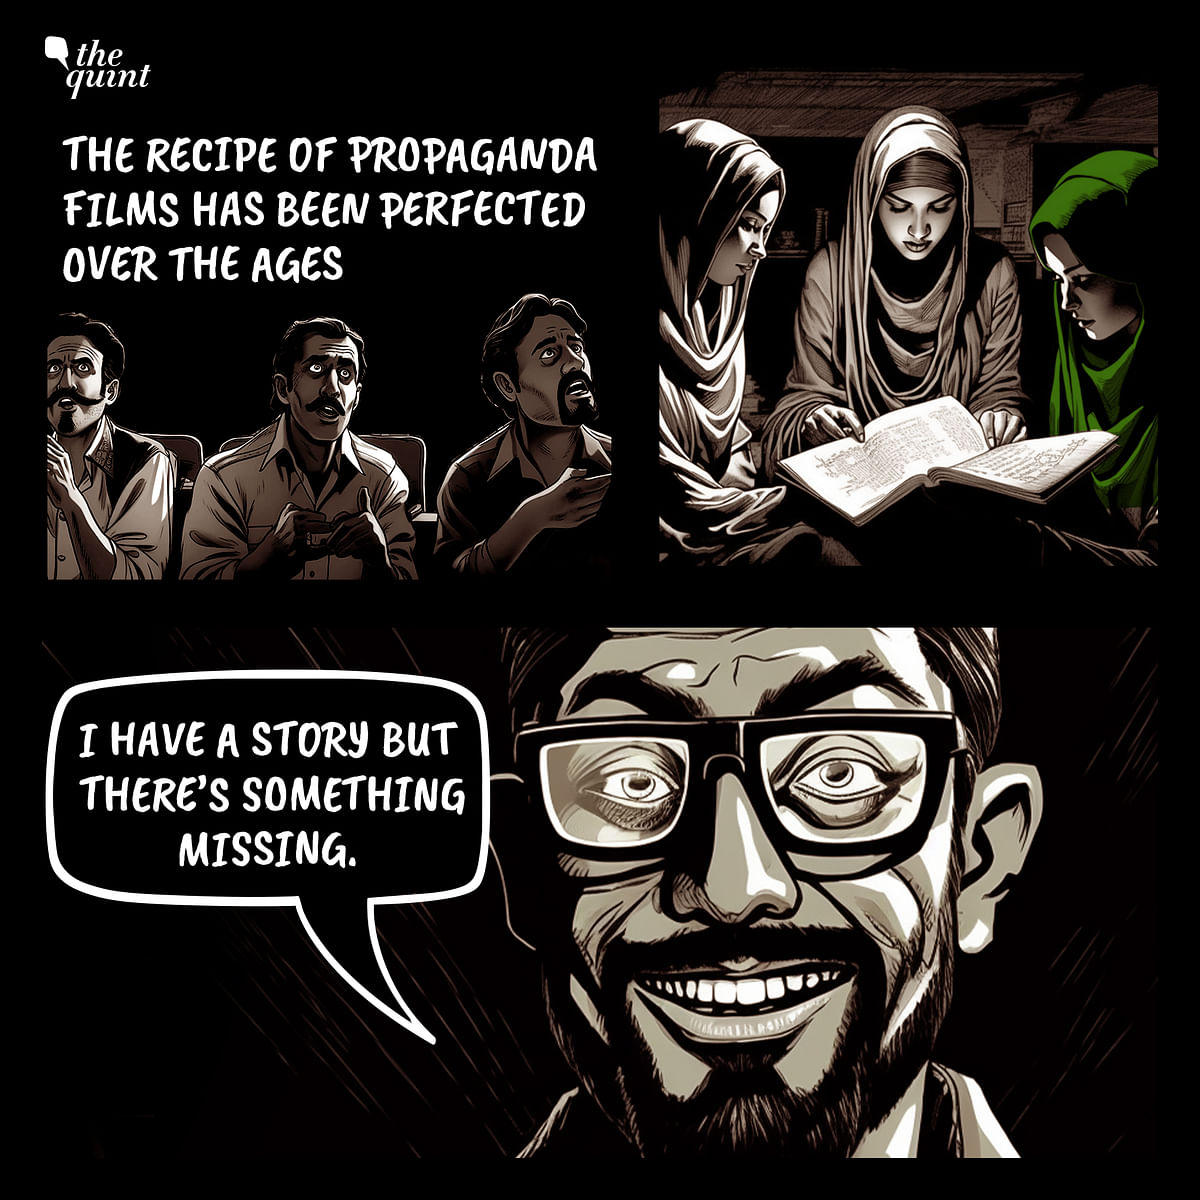 A graphic novel visualised with the help of Midjourney explores the ingredients of a propaganda film in India.